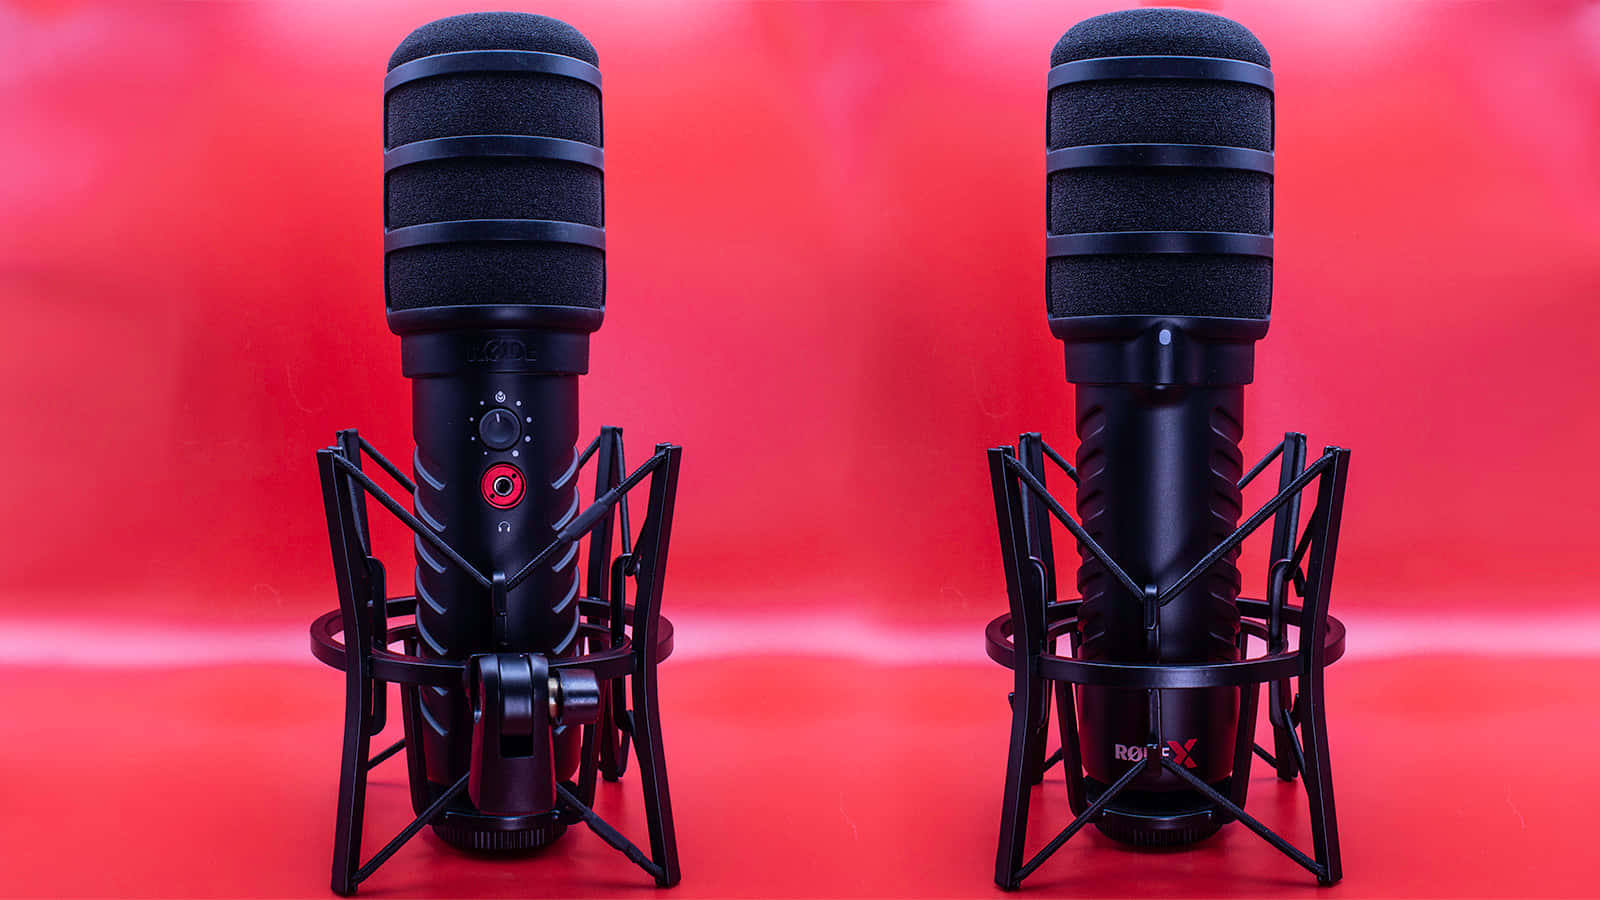 Rode USB Microphones Red background